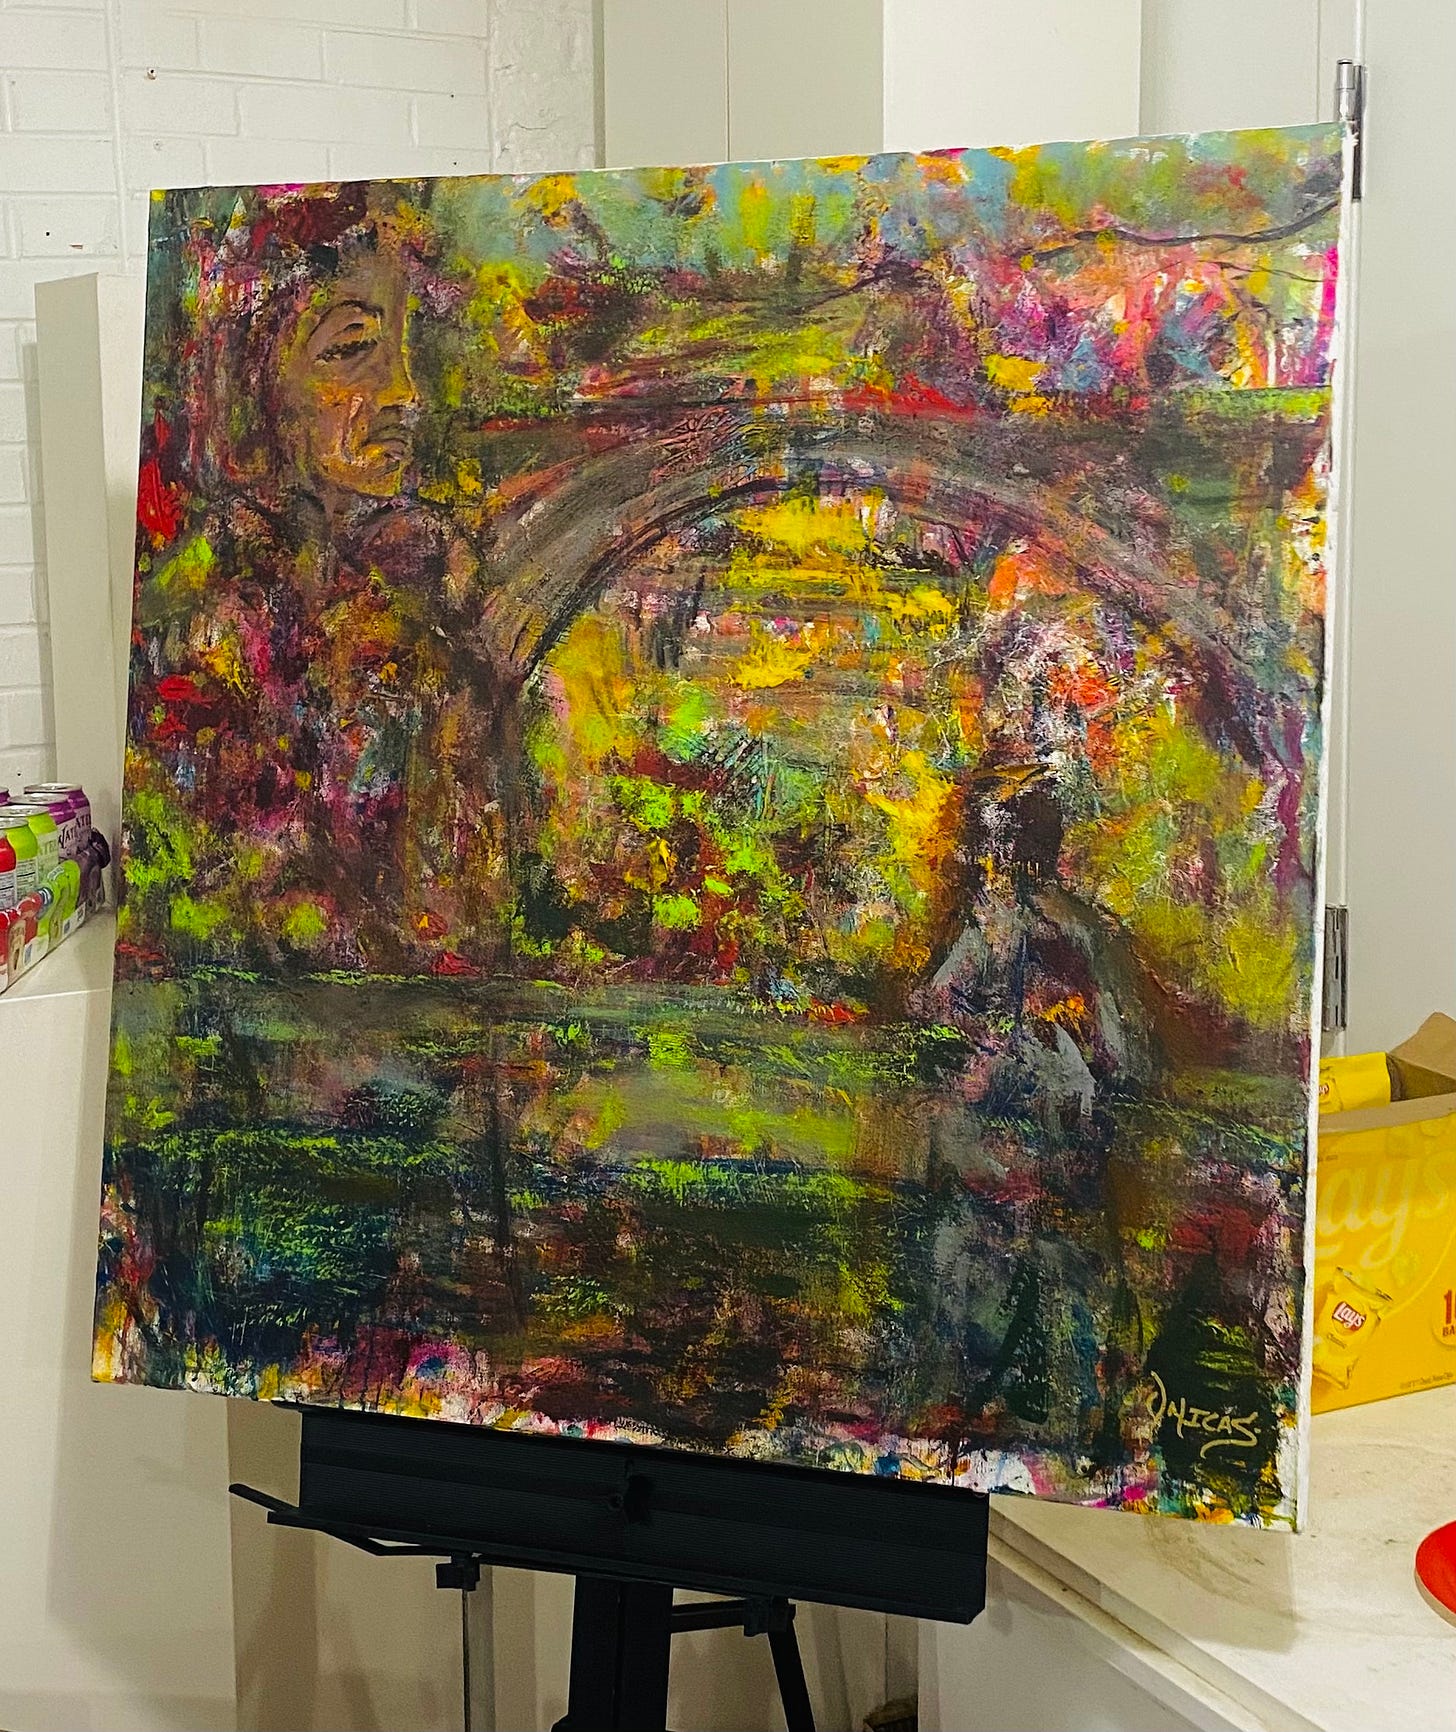 A painting by Onicas Gaddis with lots of color and texture displayed on a black metal easel. The painting features a large face in the top left corner, a bridge, and a person with their back to the viewer in the bottom right corner.